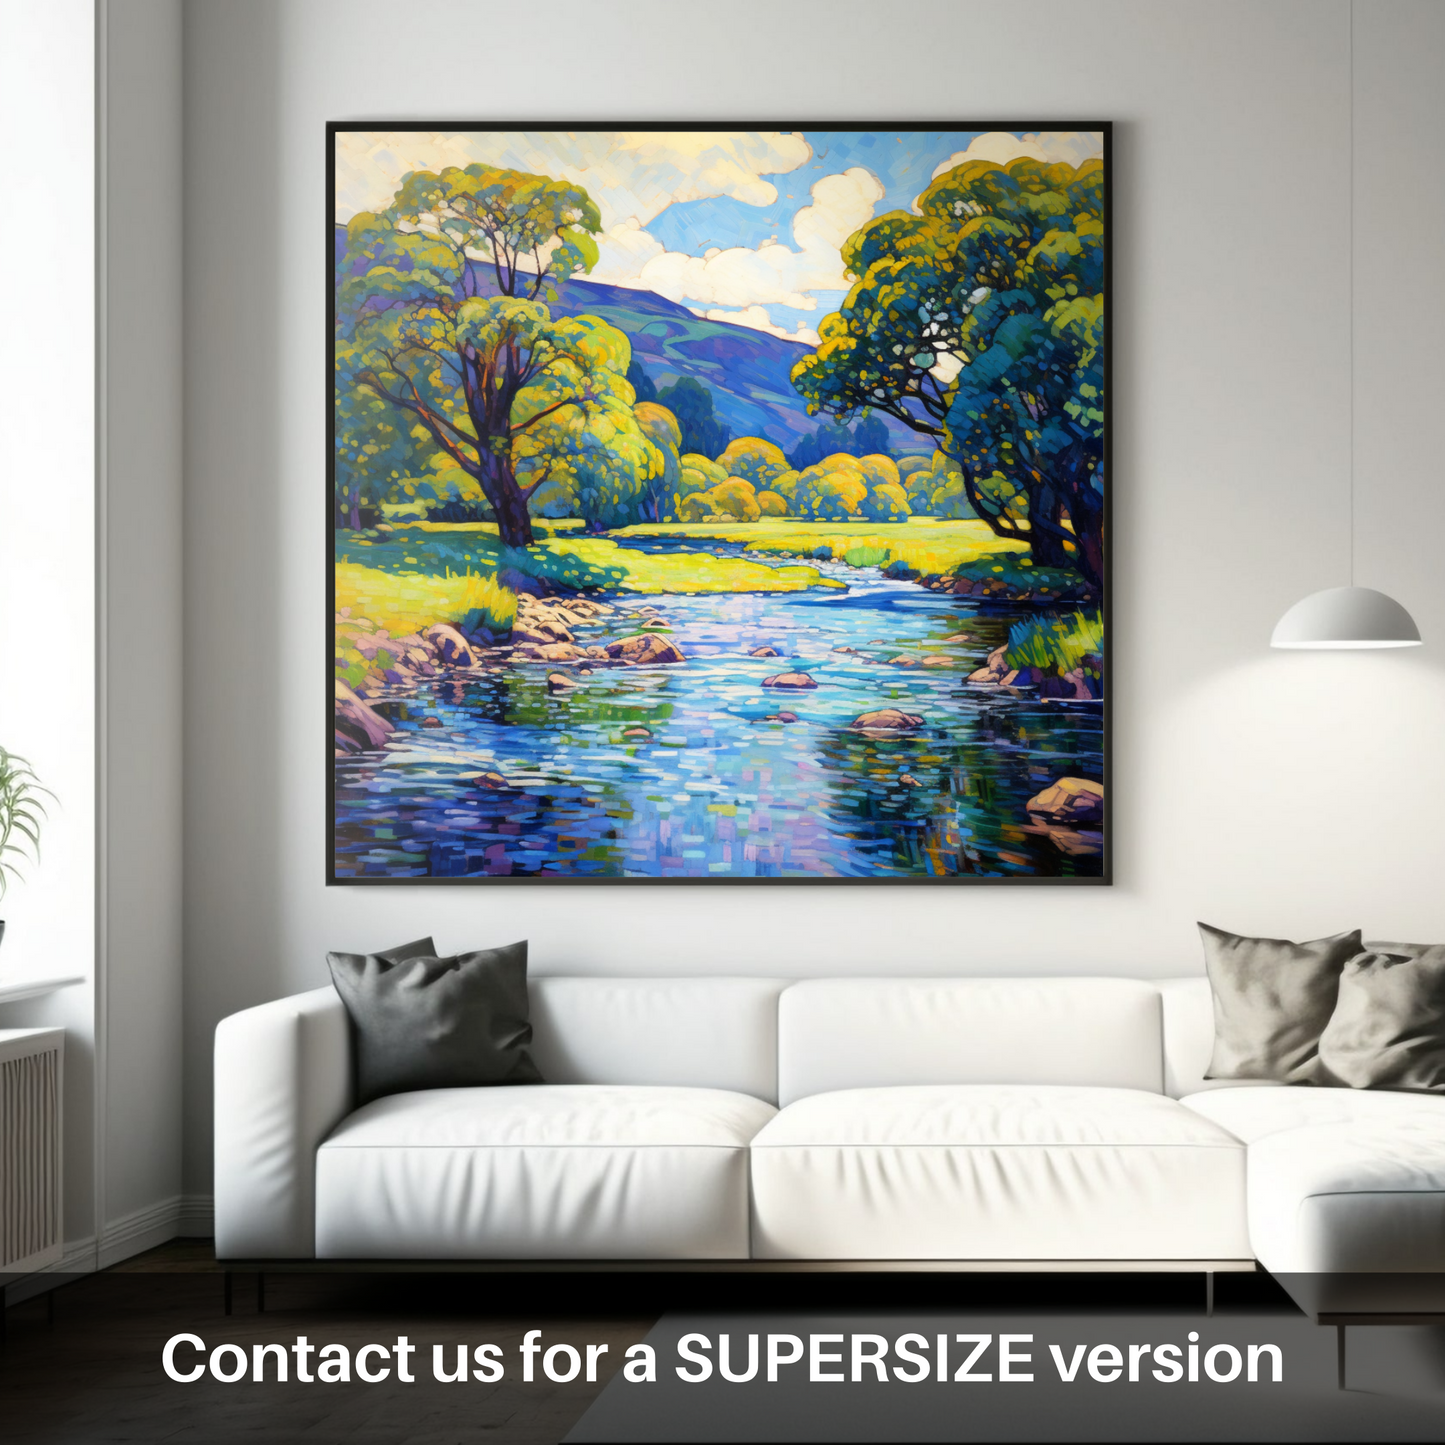 Huge supersize print of River Earn, Perthshire in summer